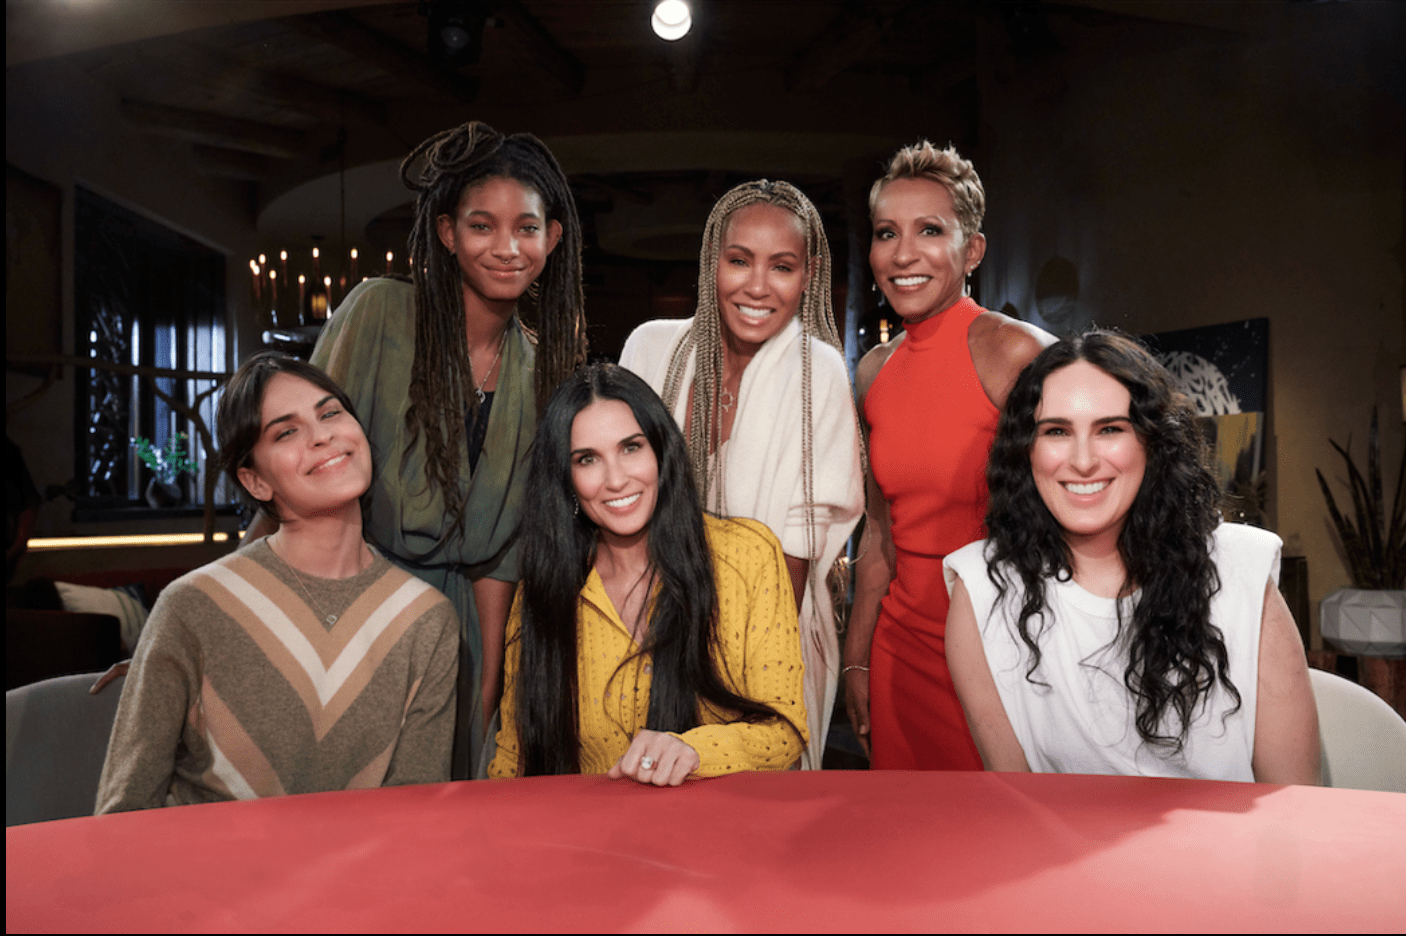 Demi Moore, Rumer Willis and Tallulah Willis join Willow Smith, Jada Pinkett-Smith, and Adrienne Banfield Norris on Red Table Talk